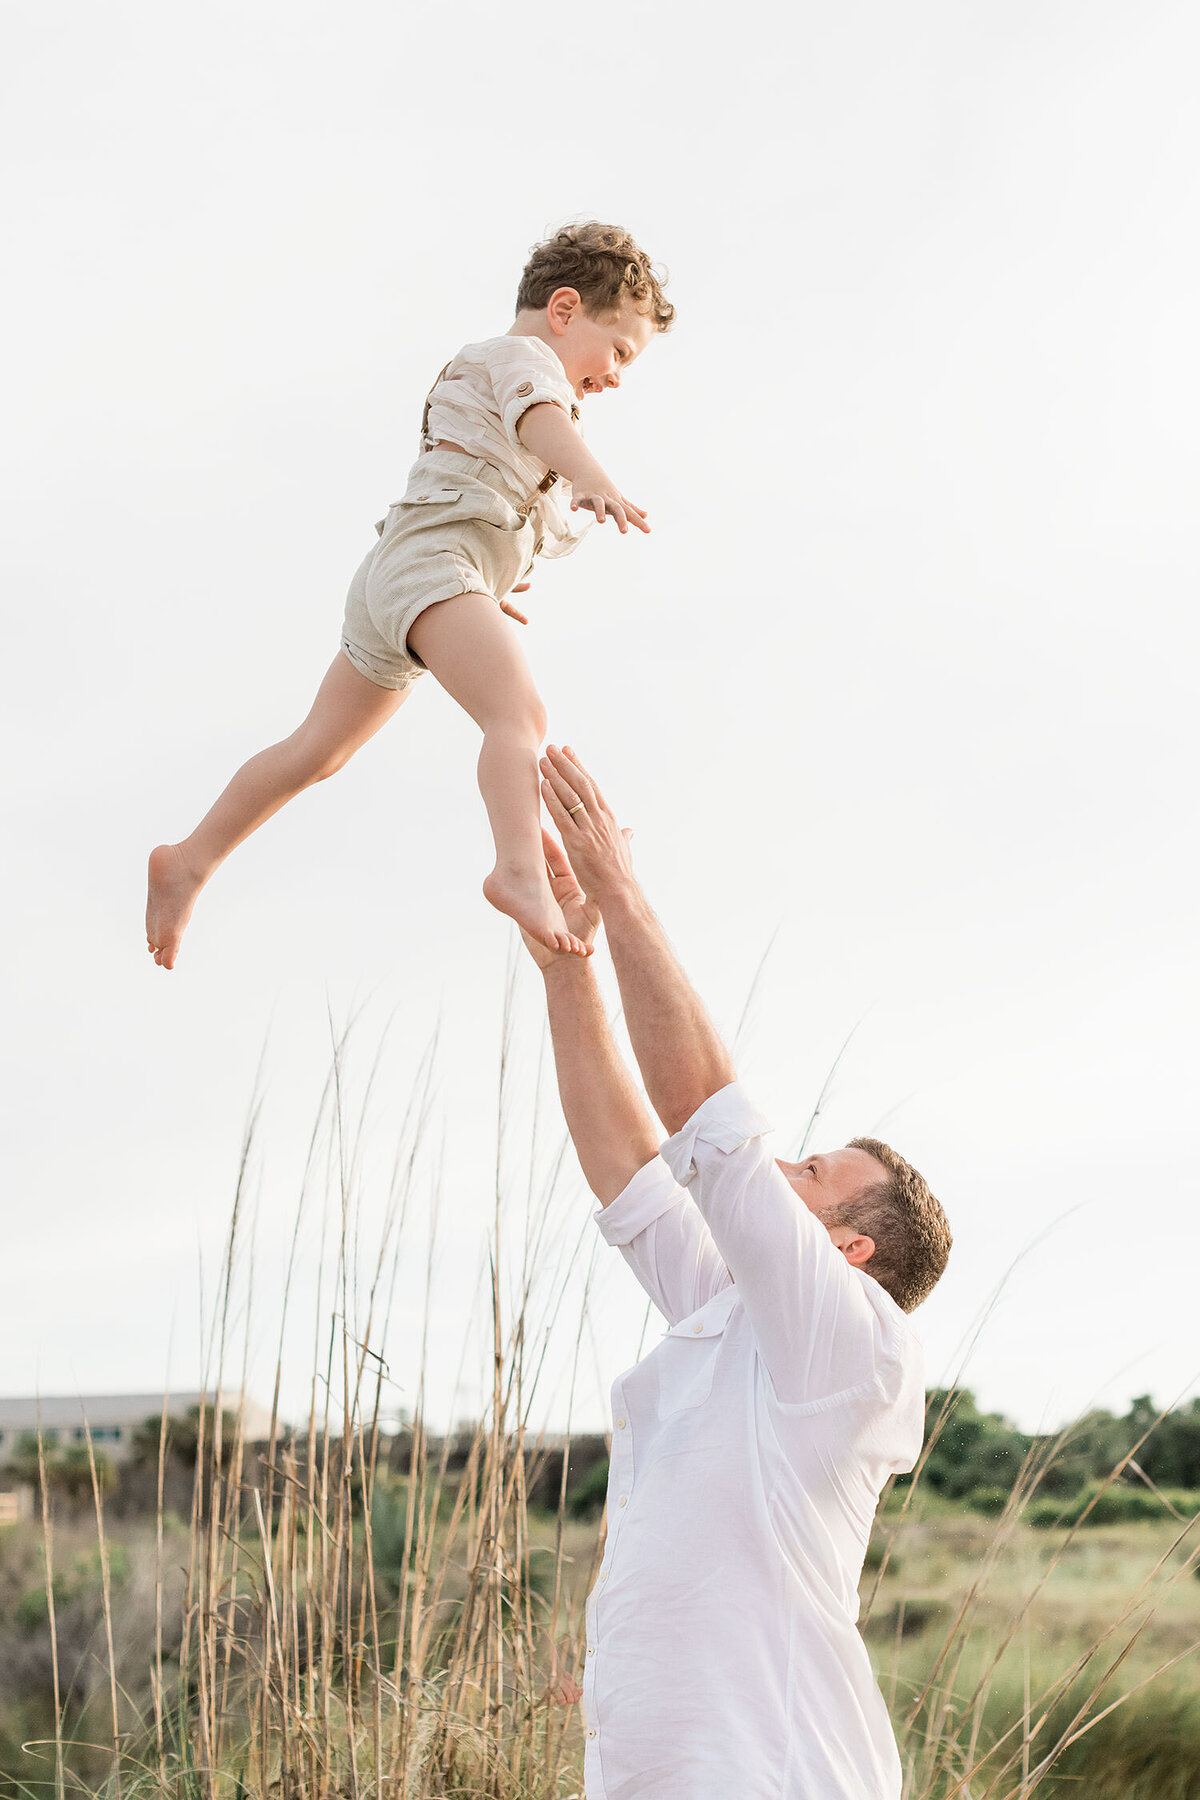 a father is tossing his son high up in the air in a beautifu; beach location